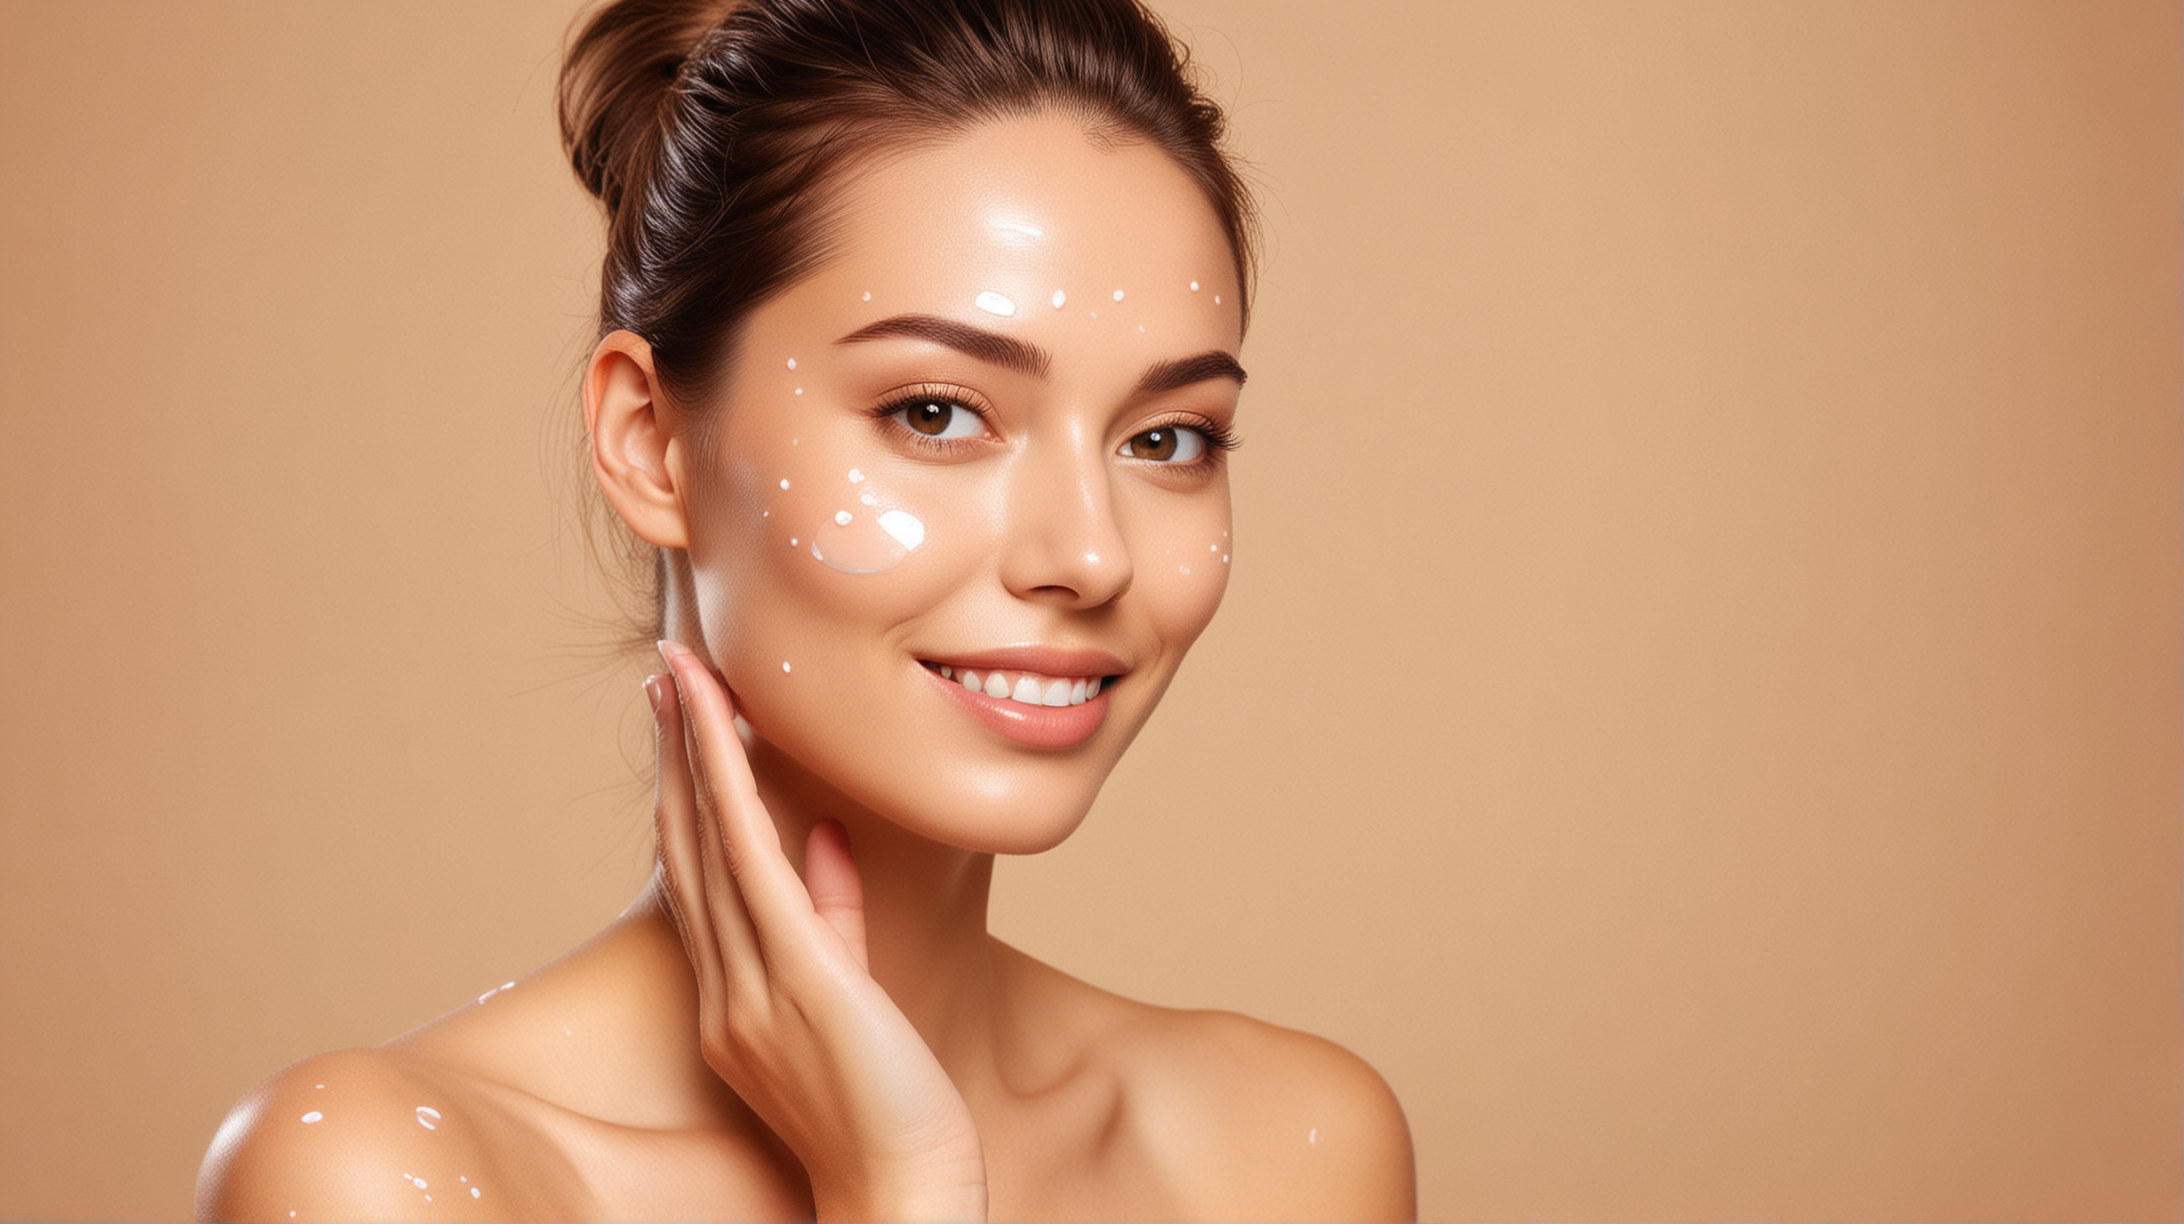 Create an image of a person applying topical glutathione on their skin, with rays of light symbolizing the skin benefits of glutathione. The person looks radiant and glowing, with a subtle smile on their face. Use warm colors to convey the positive effects of glutathione on the skin. Show other skincare products lined up beside the glutathione as a representation of how it maximizes the benefits of other skincare products.